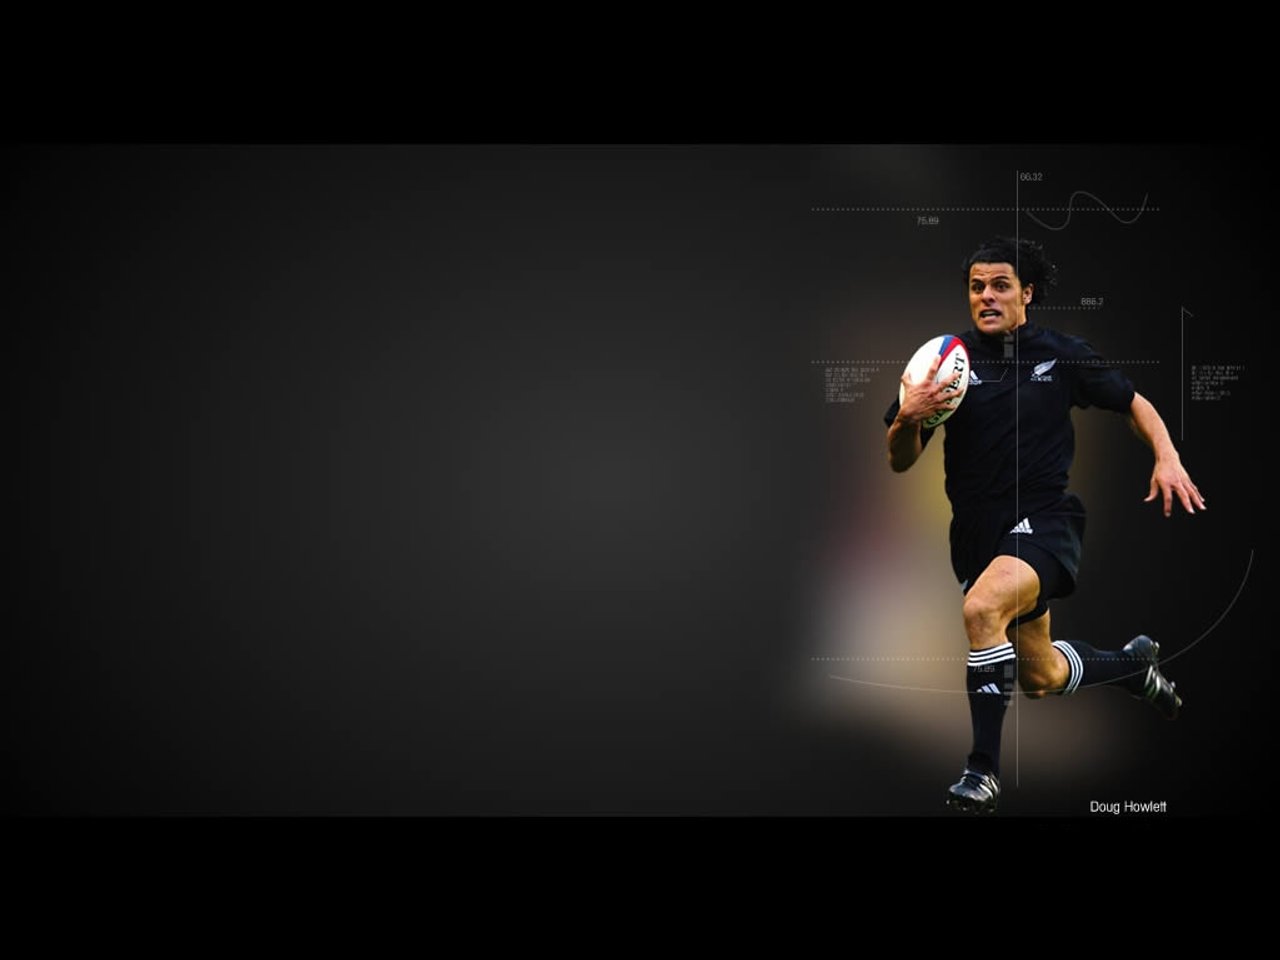 Wallpaper Rugby Sports Gallery Pc